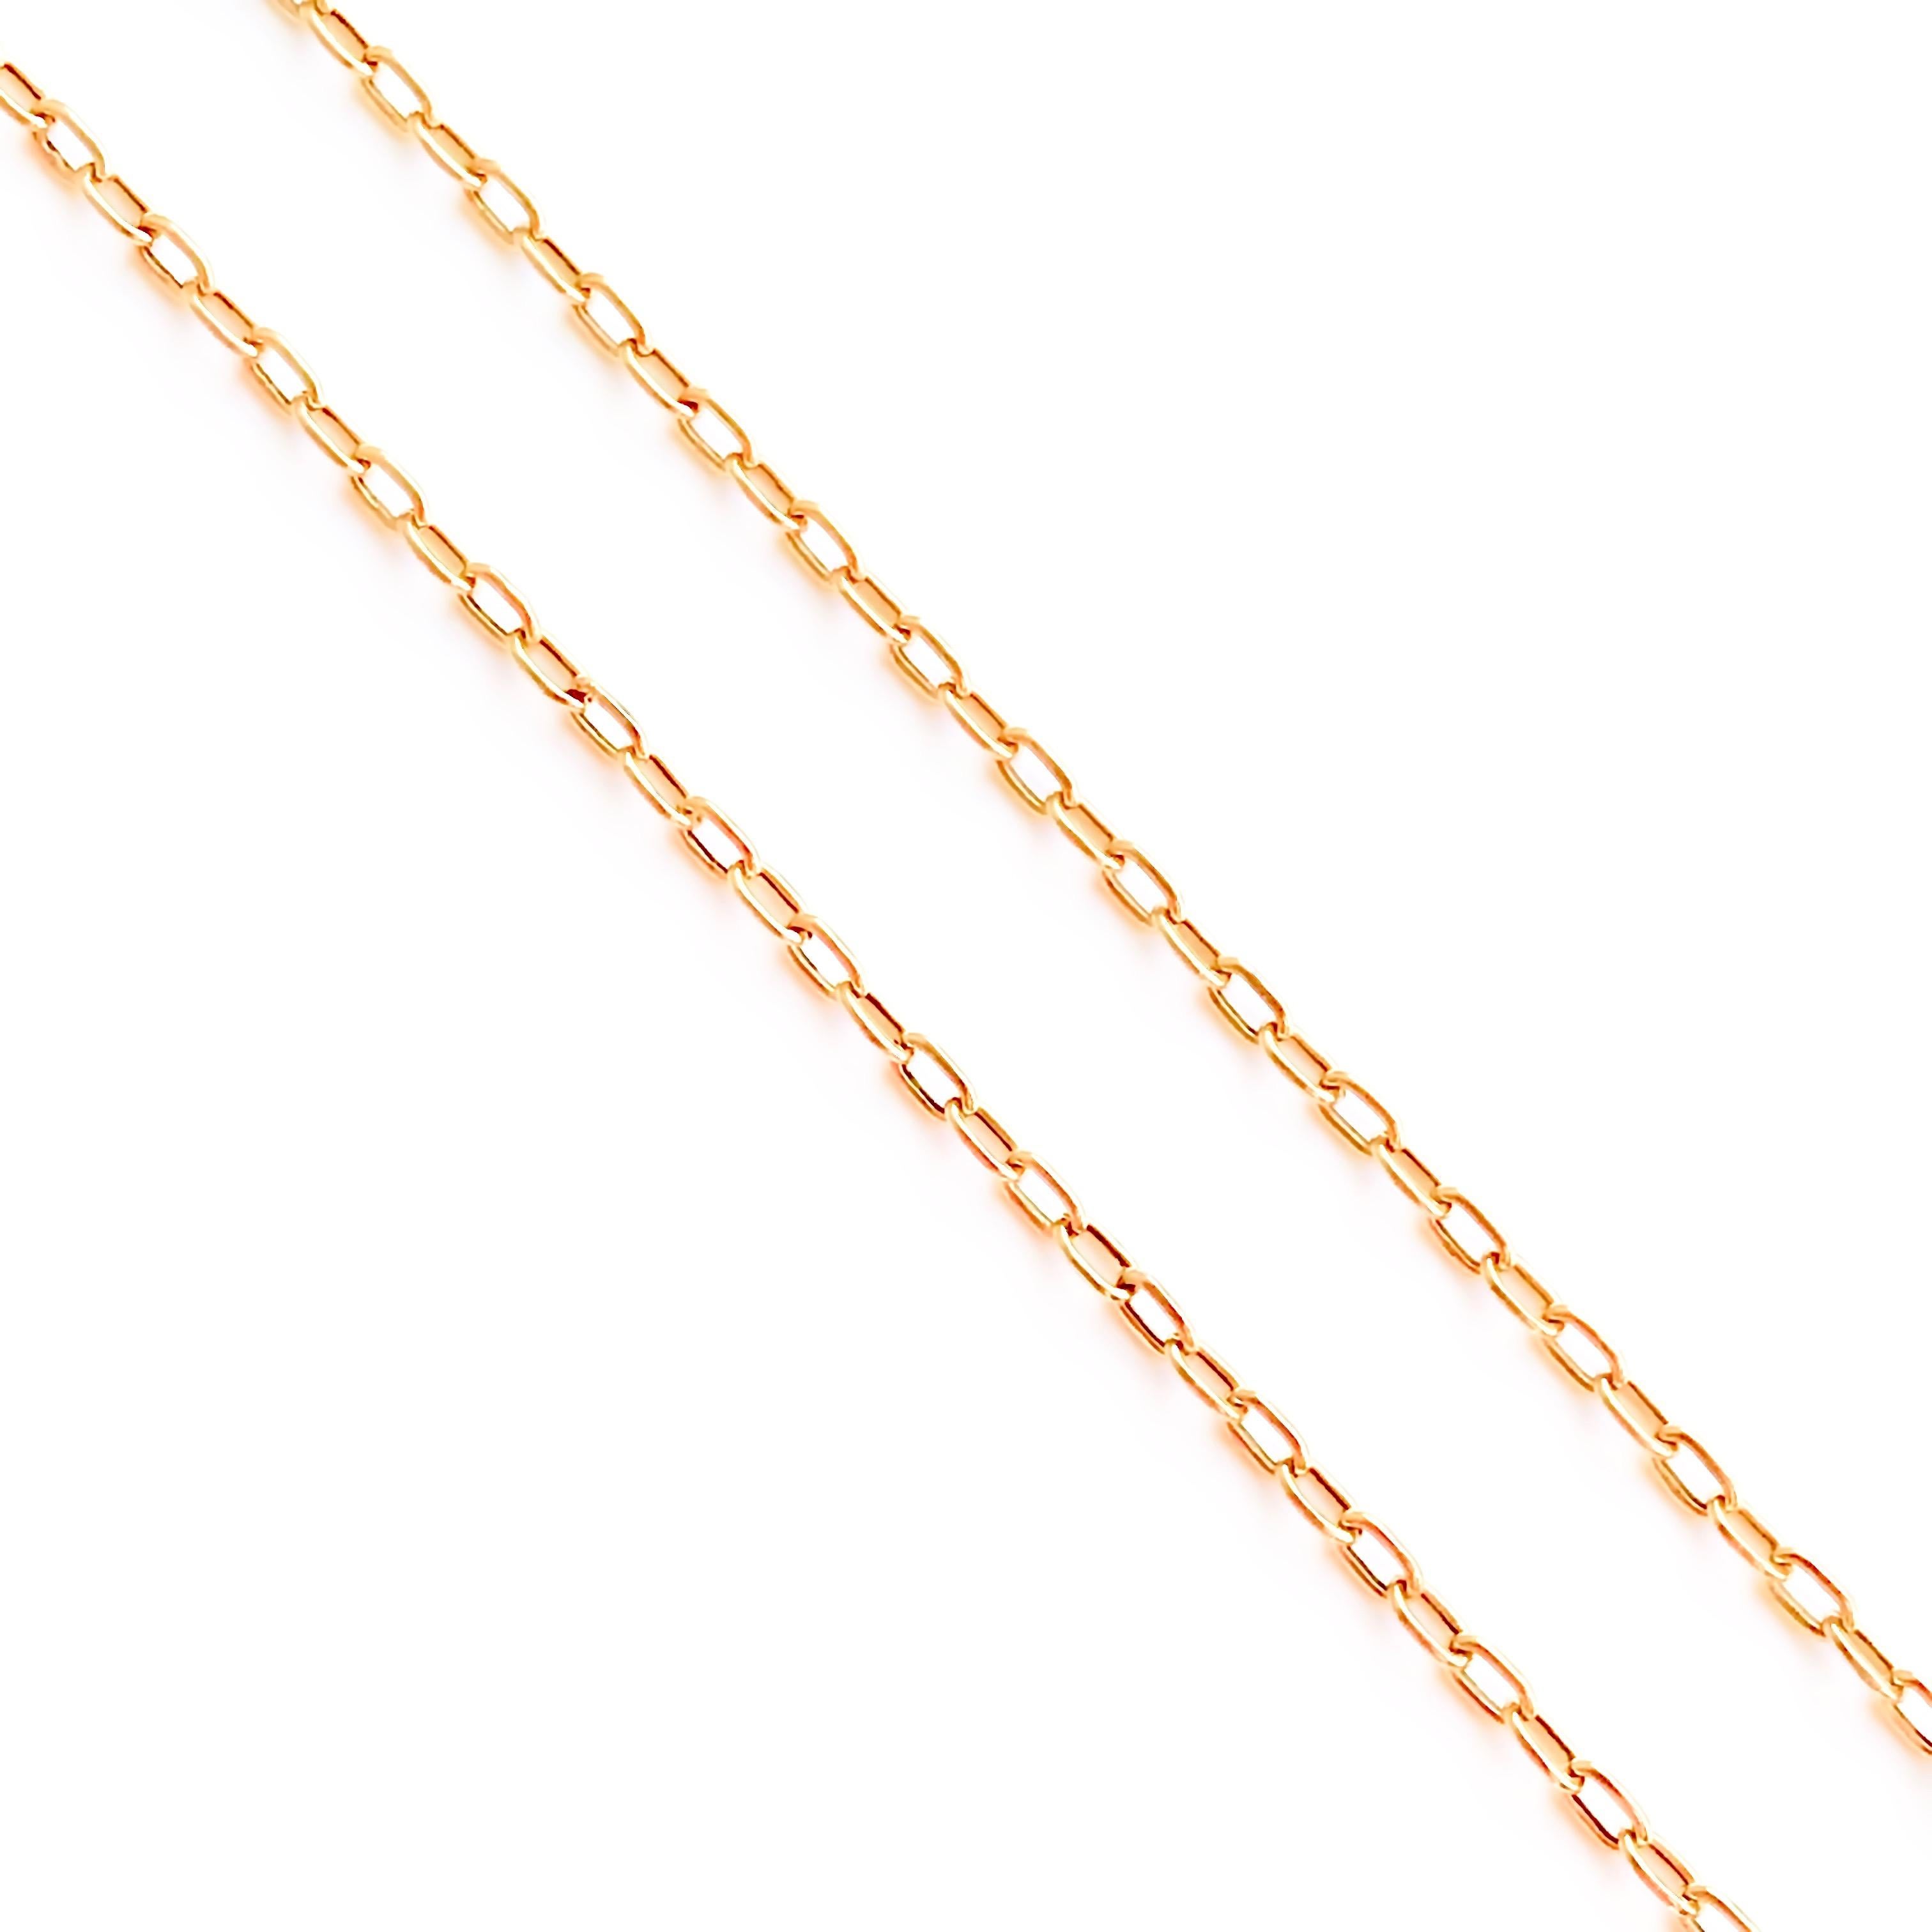 Solid 18 Karat vintage inspired yellow gold chain with a handmade secure clasp. 
Ideal to wear with pendants, layered with other chains or just by itself.
Hallmark: London’s  Goldsmiths’ Company –  Assay Office
Length: 60.00cm
Gauge:  2.30mm
Weight: